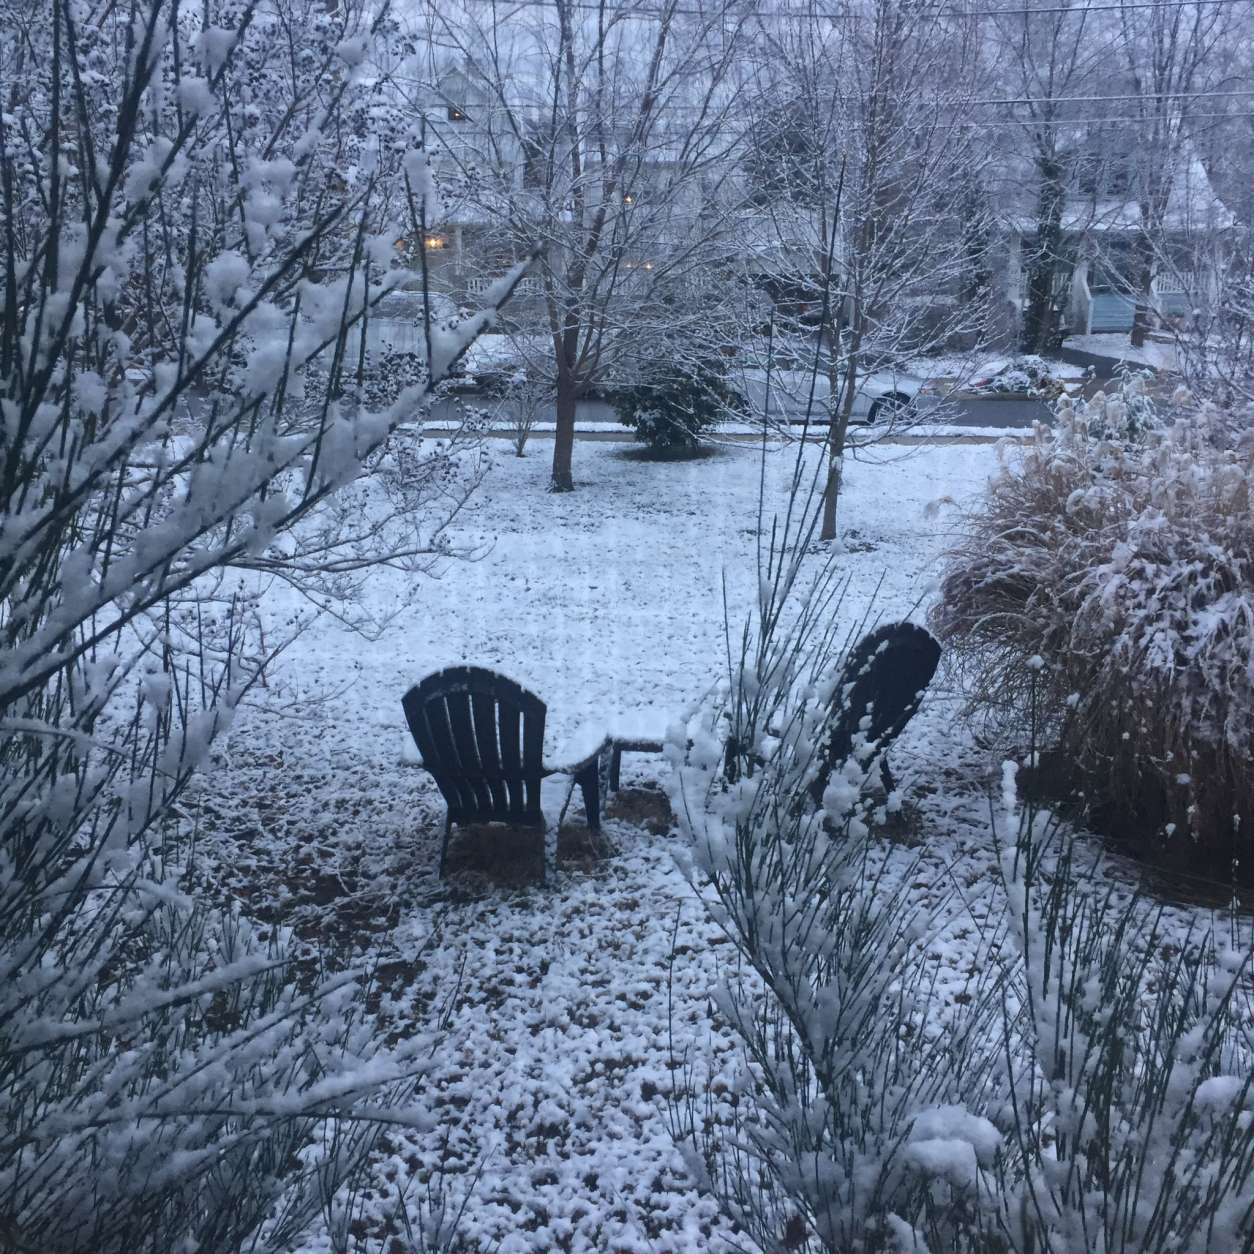 A snowy Monday morning in Hyattsville, Maryland. (Courtesy @TillyCotter via Twitter)